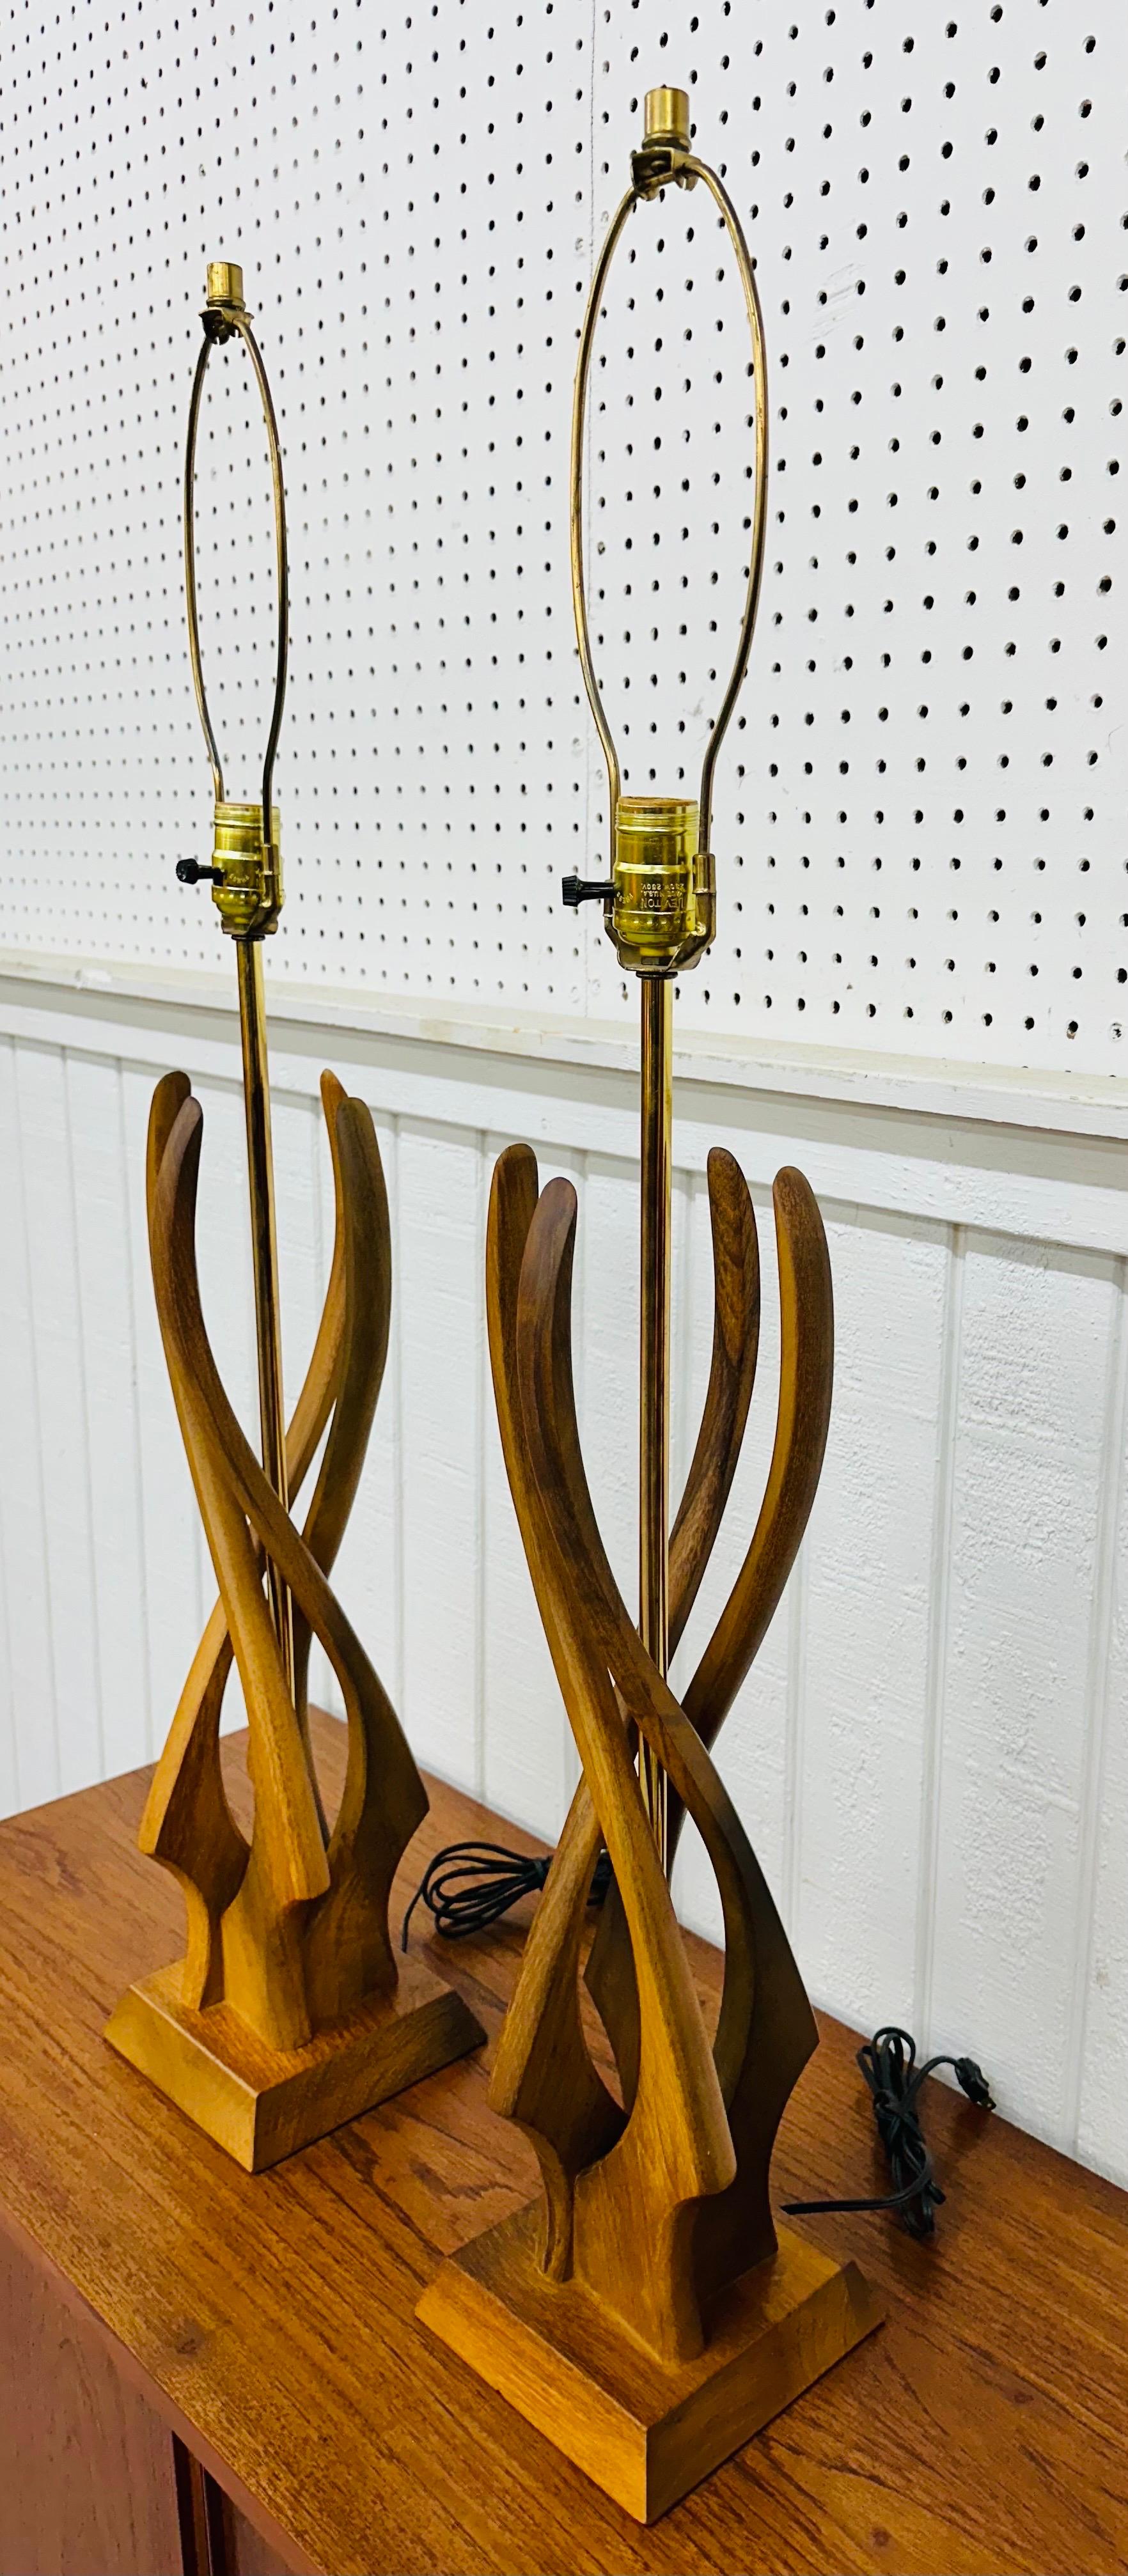 This listing is for a pair of Mid-Century Modern Twisted Walnut Table Lamps. Featuring a brutalist design, walnut base with twisted walnut wrapping around the brass body, and brass harps with caps. This is an exceptional combination of quality and